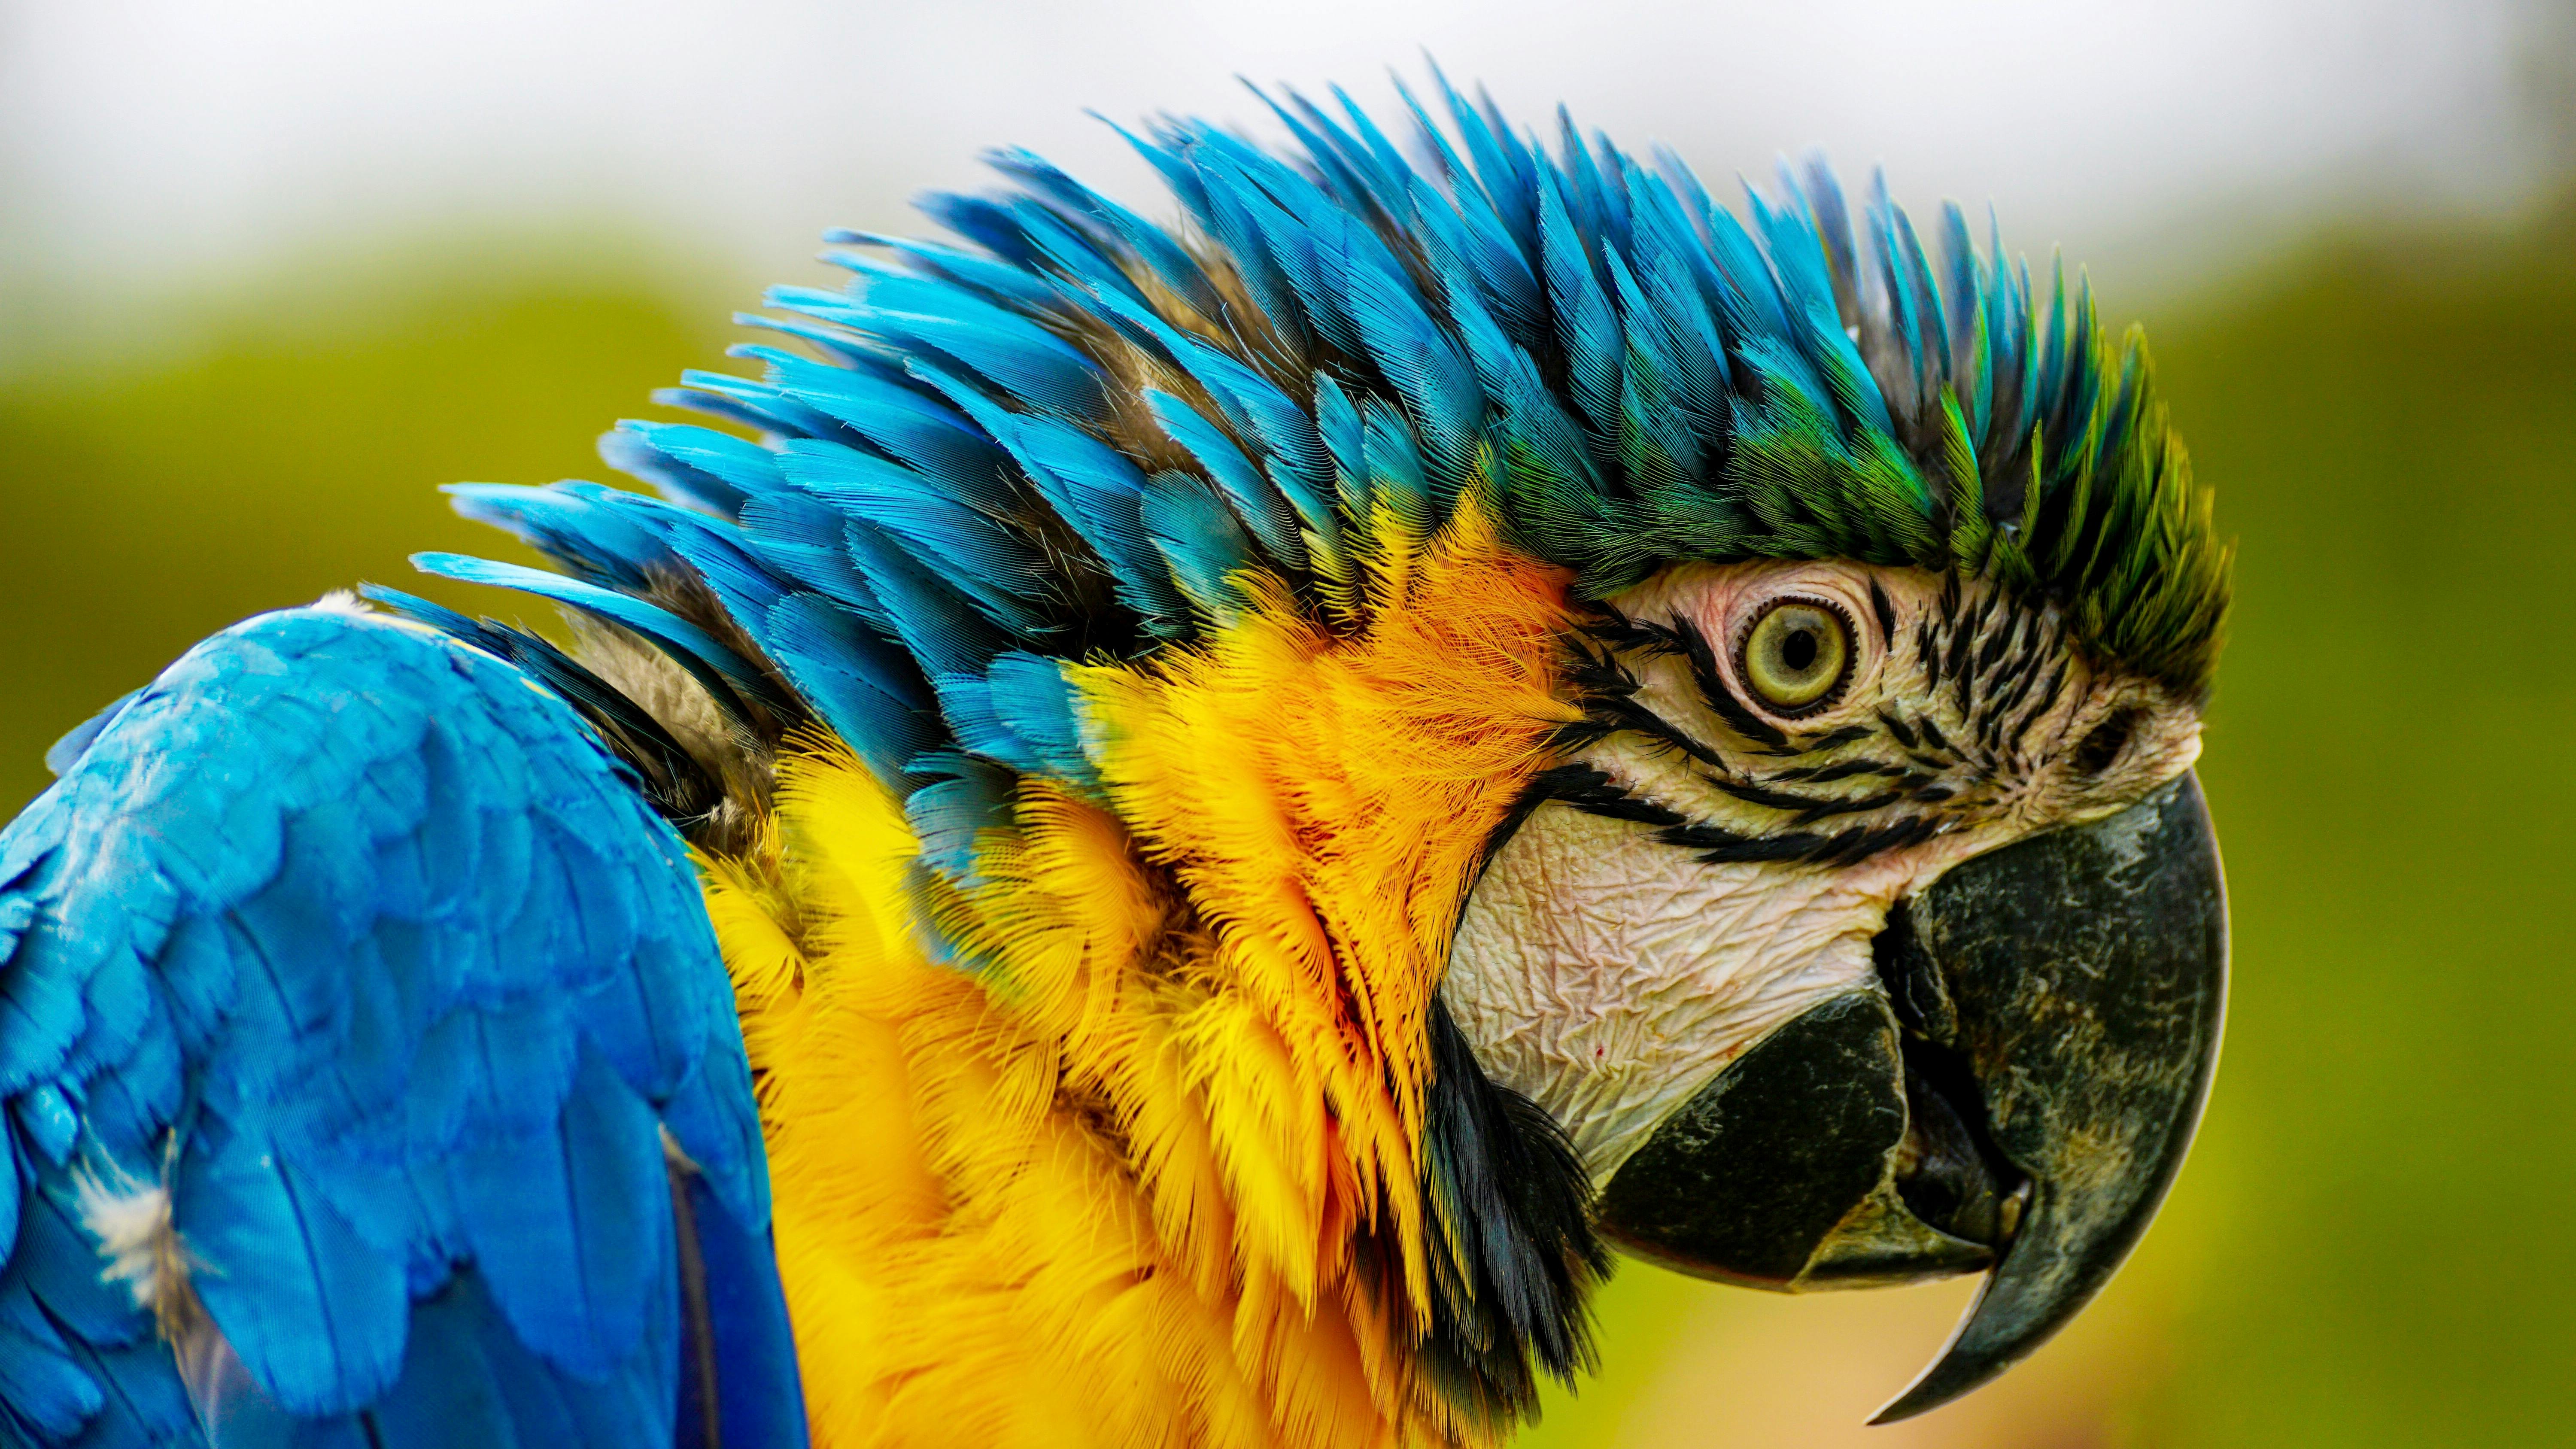 Hyacinth Macaw Parrot IPhone Wallpaper HD IPhone Wallpapers Wallpaper  Download  MOONAZ